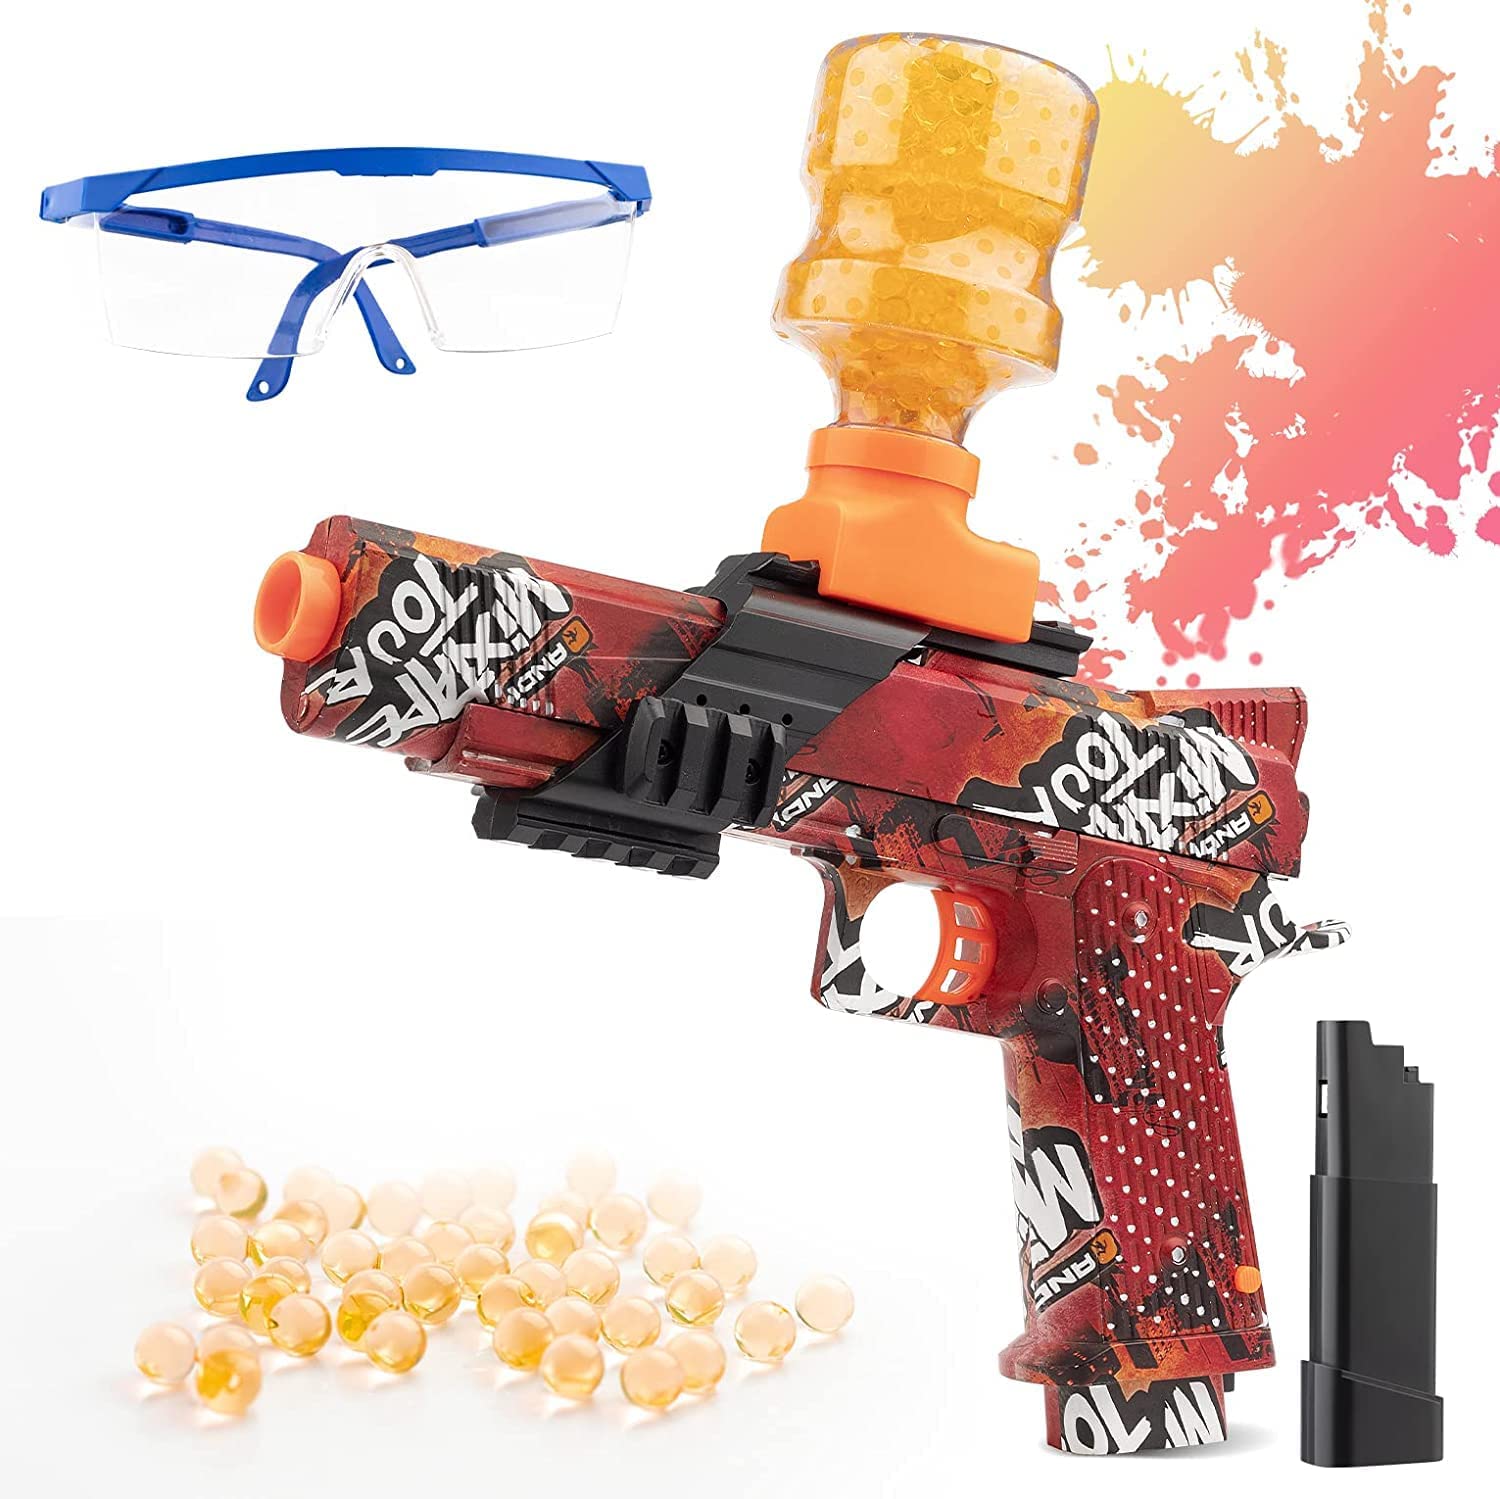 Jfieei Gel Ball Blaster, Electric Splatter Ball Blaster, with 10000 Water  Beads and Goggles, and Outdoor Team Games, Over 14+, Best Gifts for Kids 